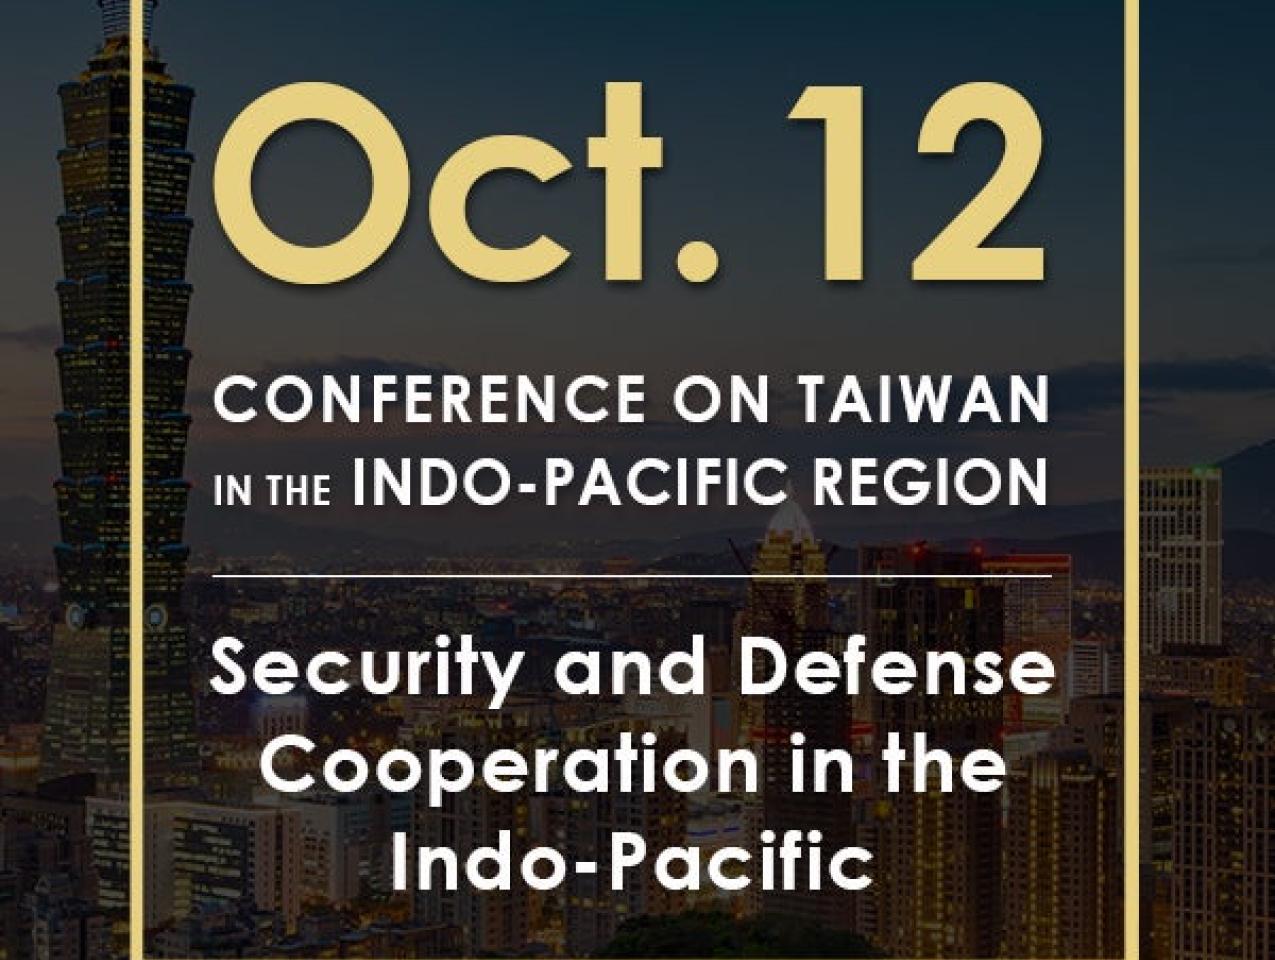 Image for Security And Defense Cooperation In The Indo-Pacific | 2020 Conference On Taiwan In The Indo-Pacific Region